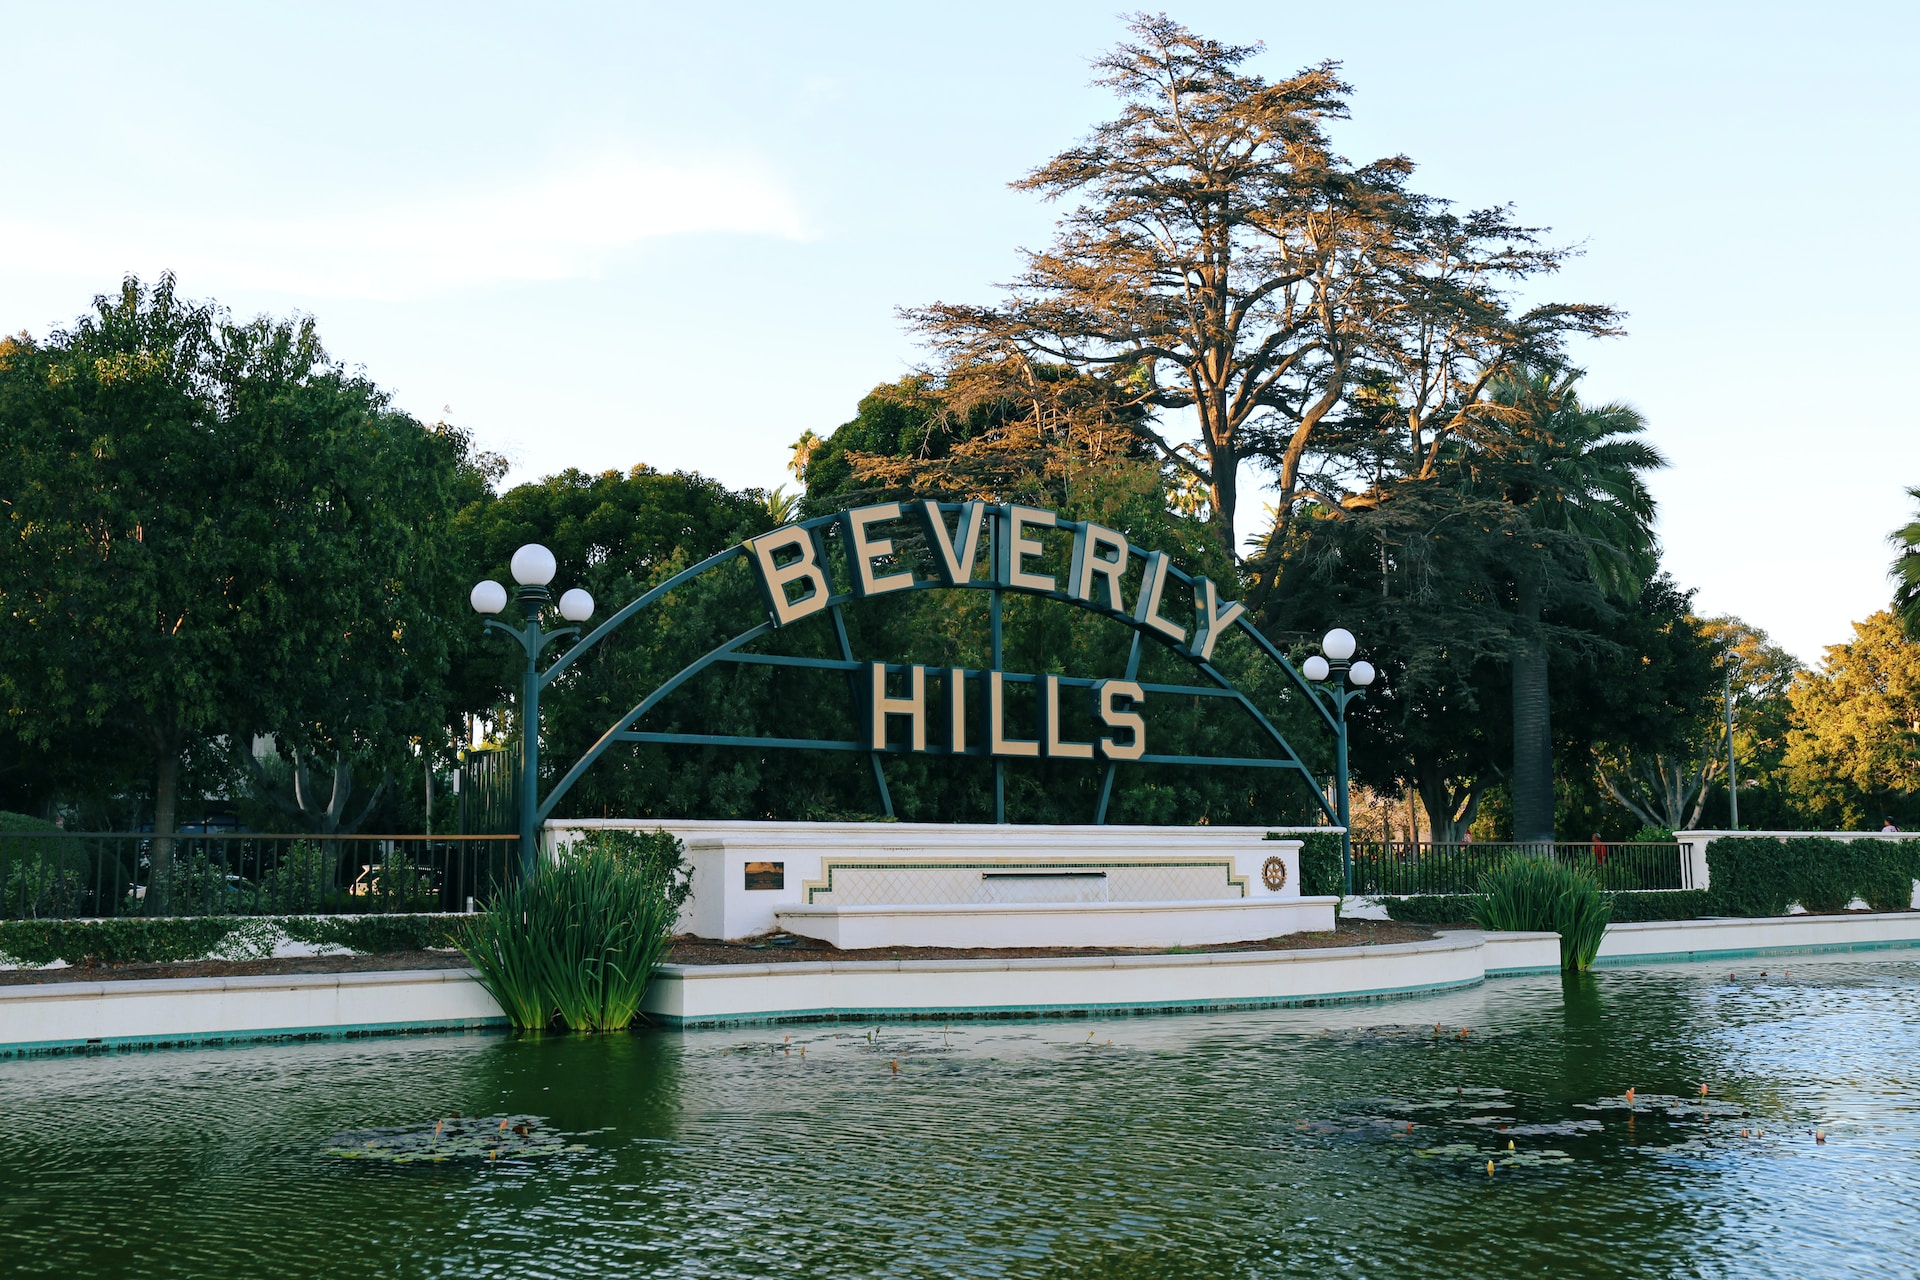 Beverly Hills residents vote against LVMH's Cheval Blanc hotel